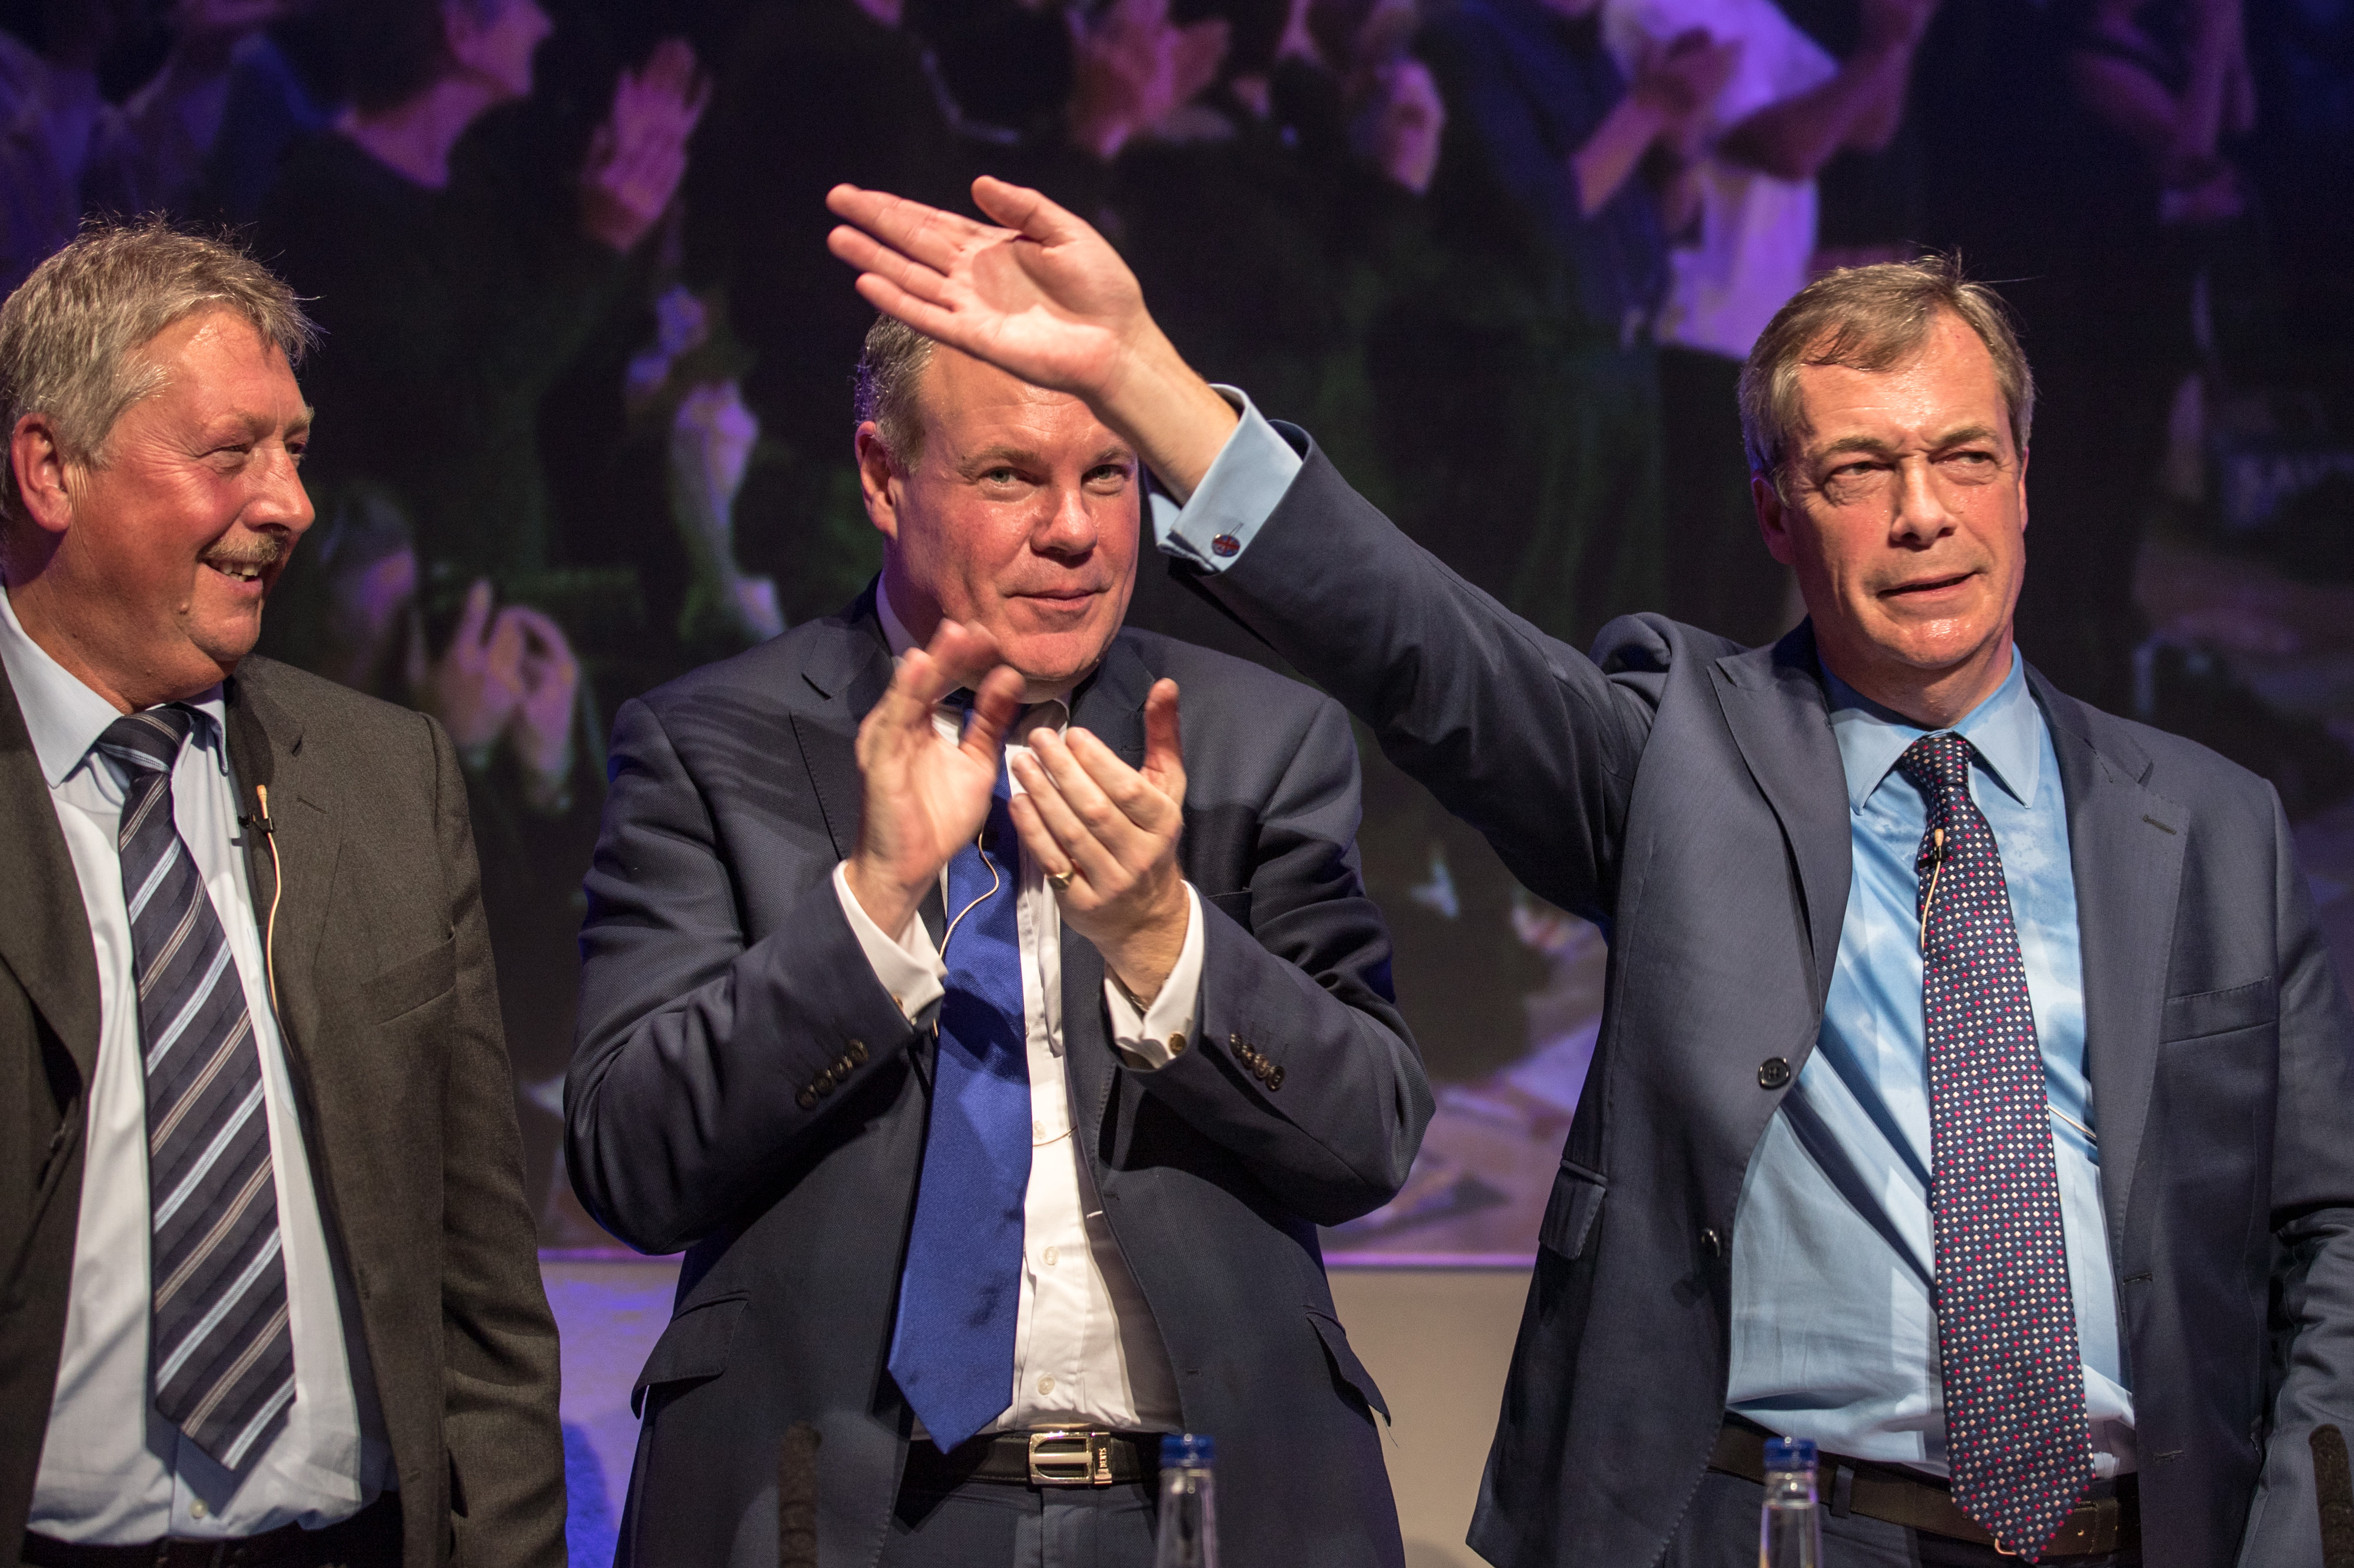 The DUP Joins Nigel Farage For Bournemouth Save Brexit Rally